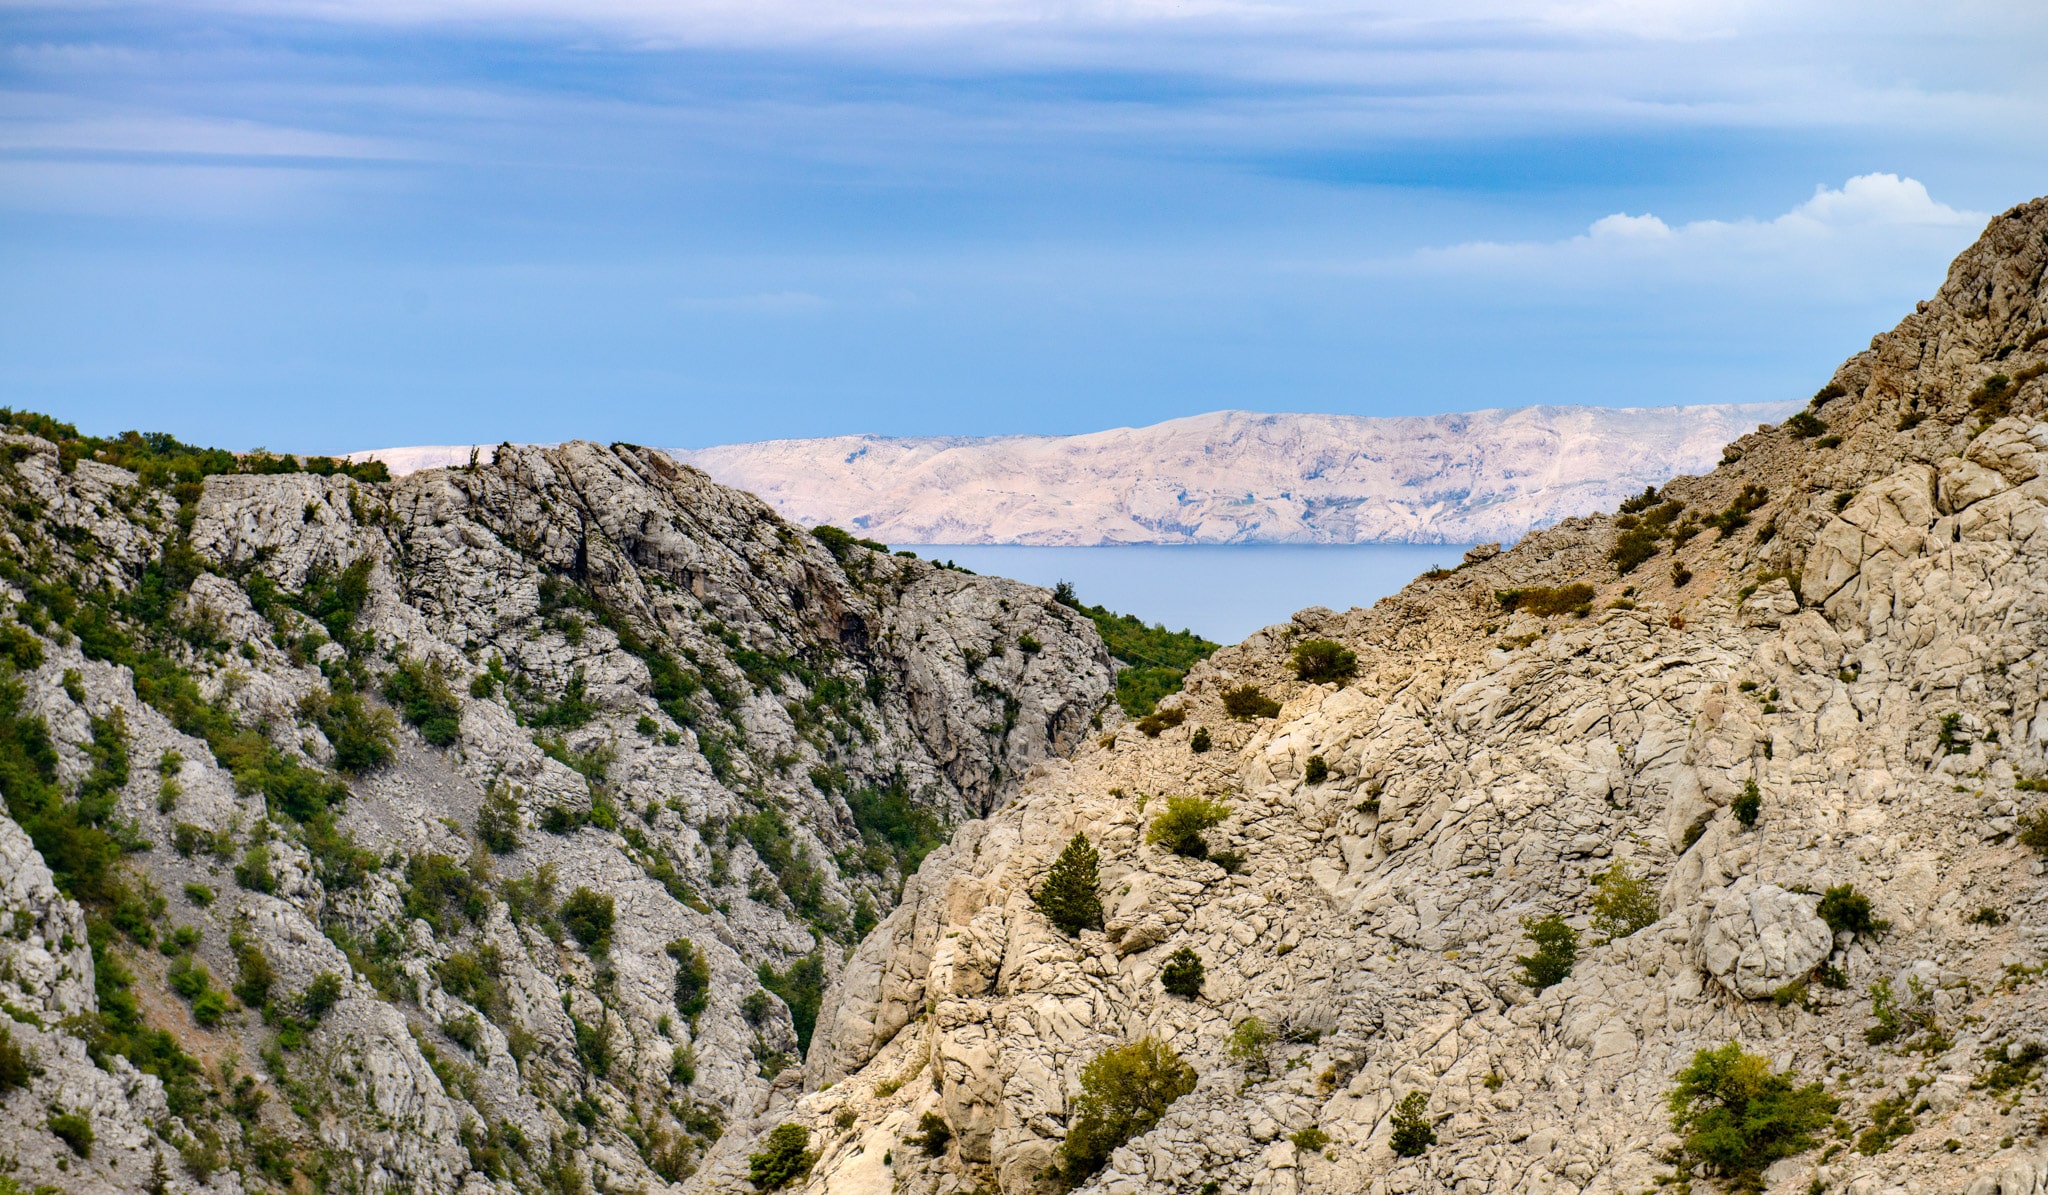 A view of the dolomite and limestone rock formations seen along the coastal road in northern Dalmatia in Croatia.